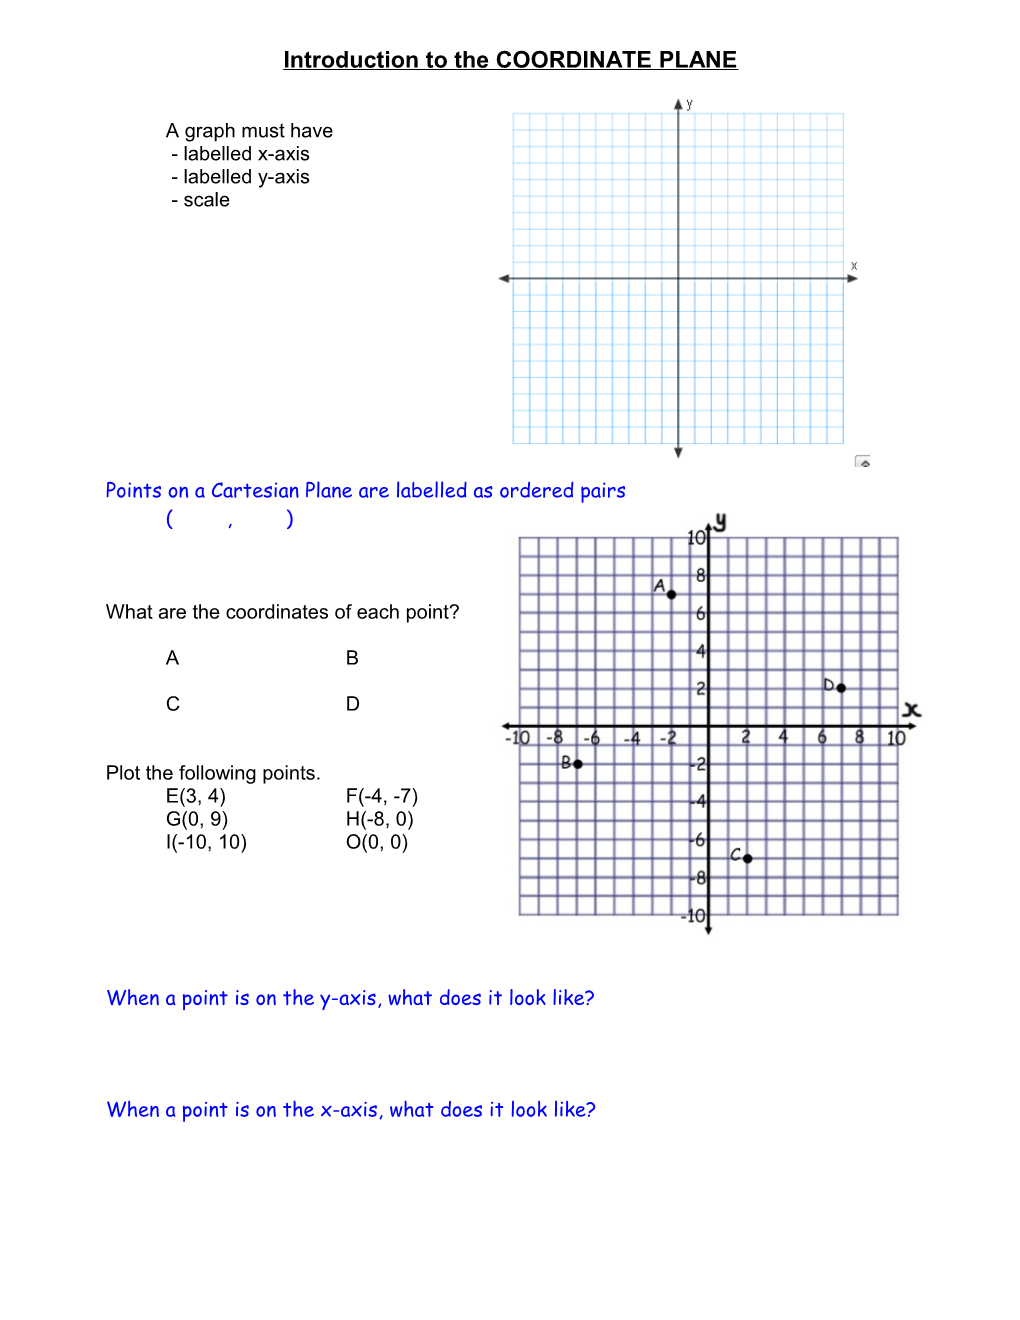 Introduction to the COORDINATE PLANE